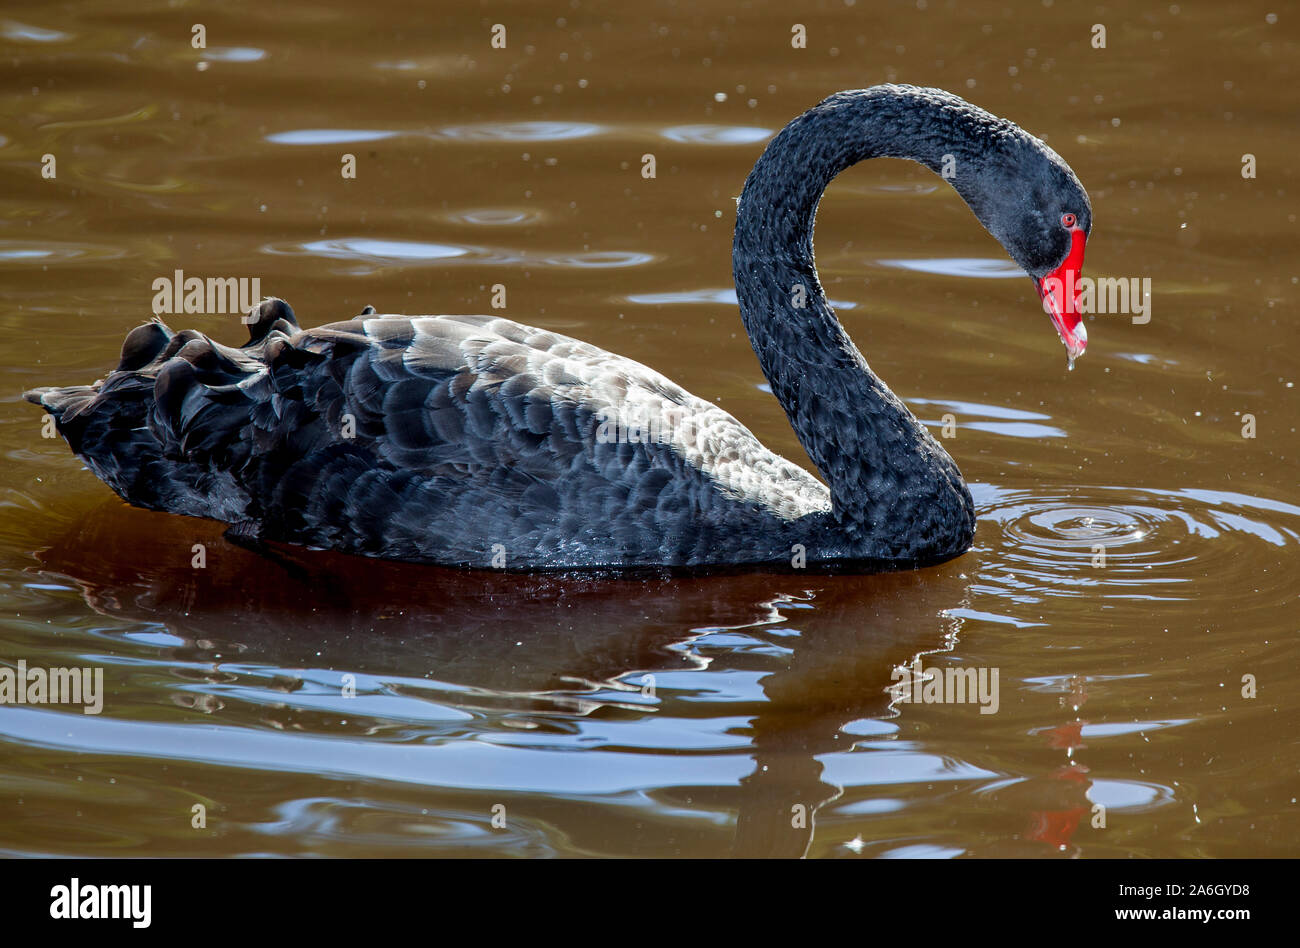 The black swan is a large waterbird, a species of swan which breeds mainly in the southeast and southwest regions of Australia. Within Australia they Stock Photo